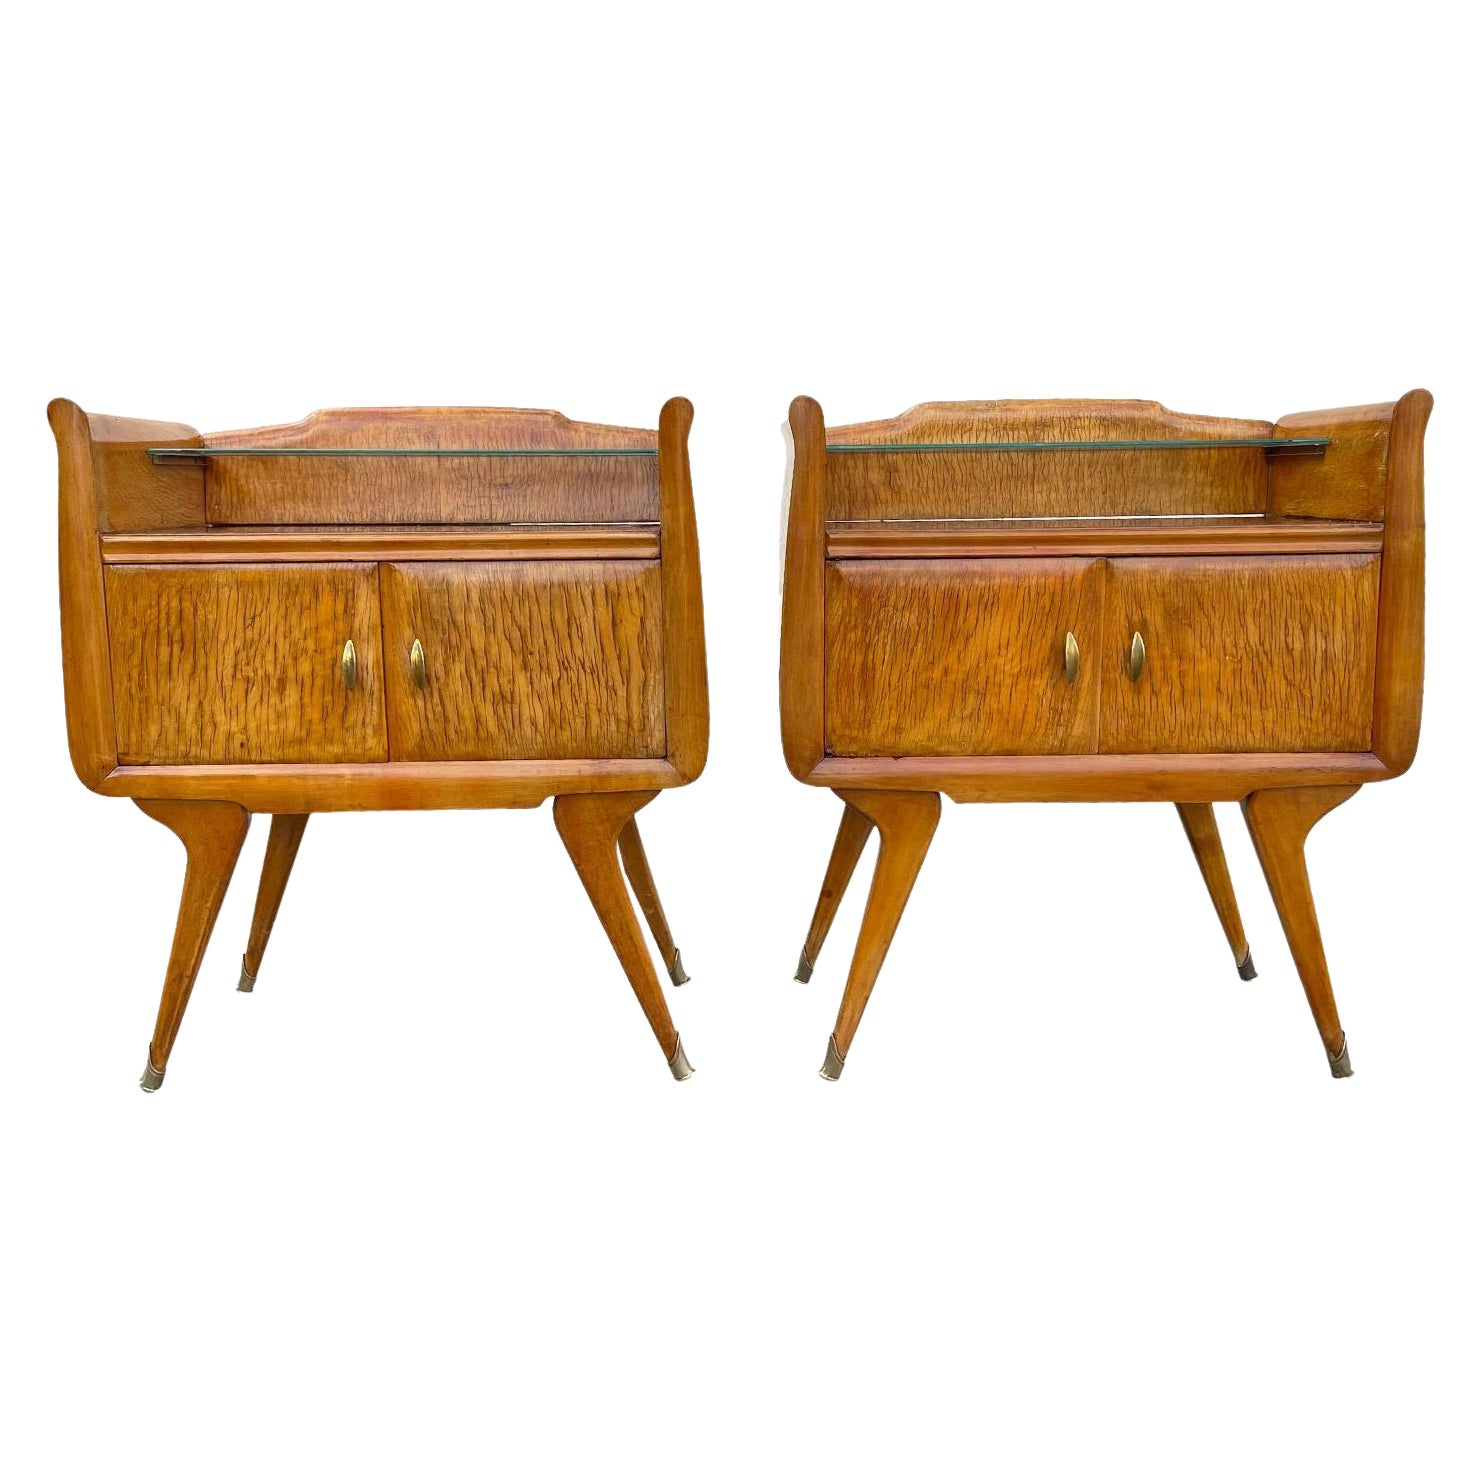 20th Century Light-Brown Italian Pair of Maplewood Nightstands by Paolo Buffa